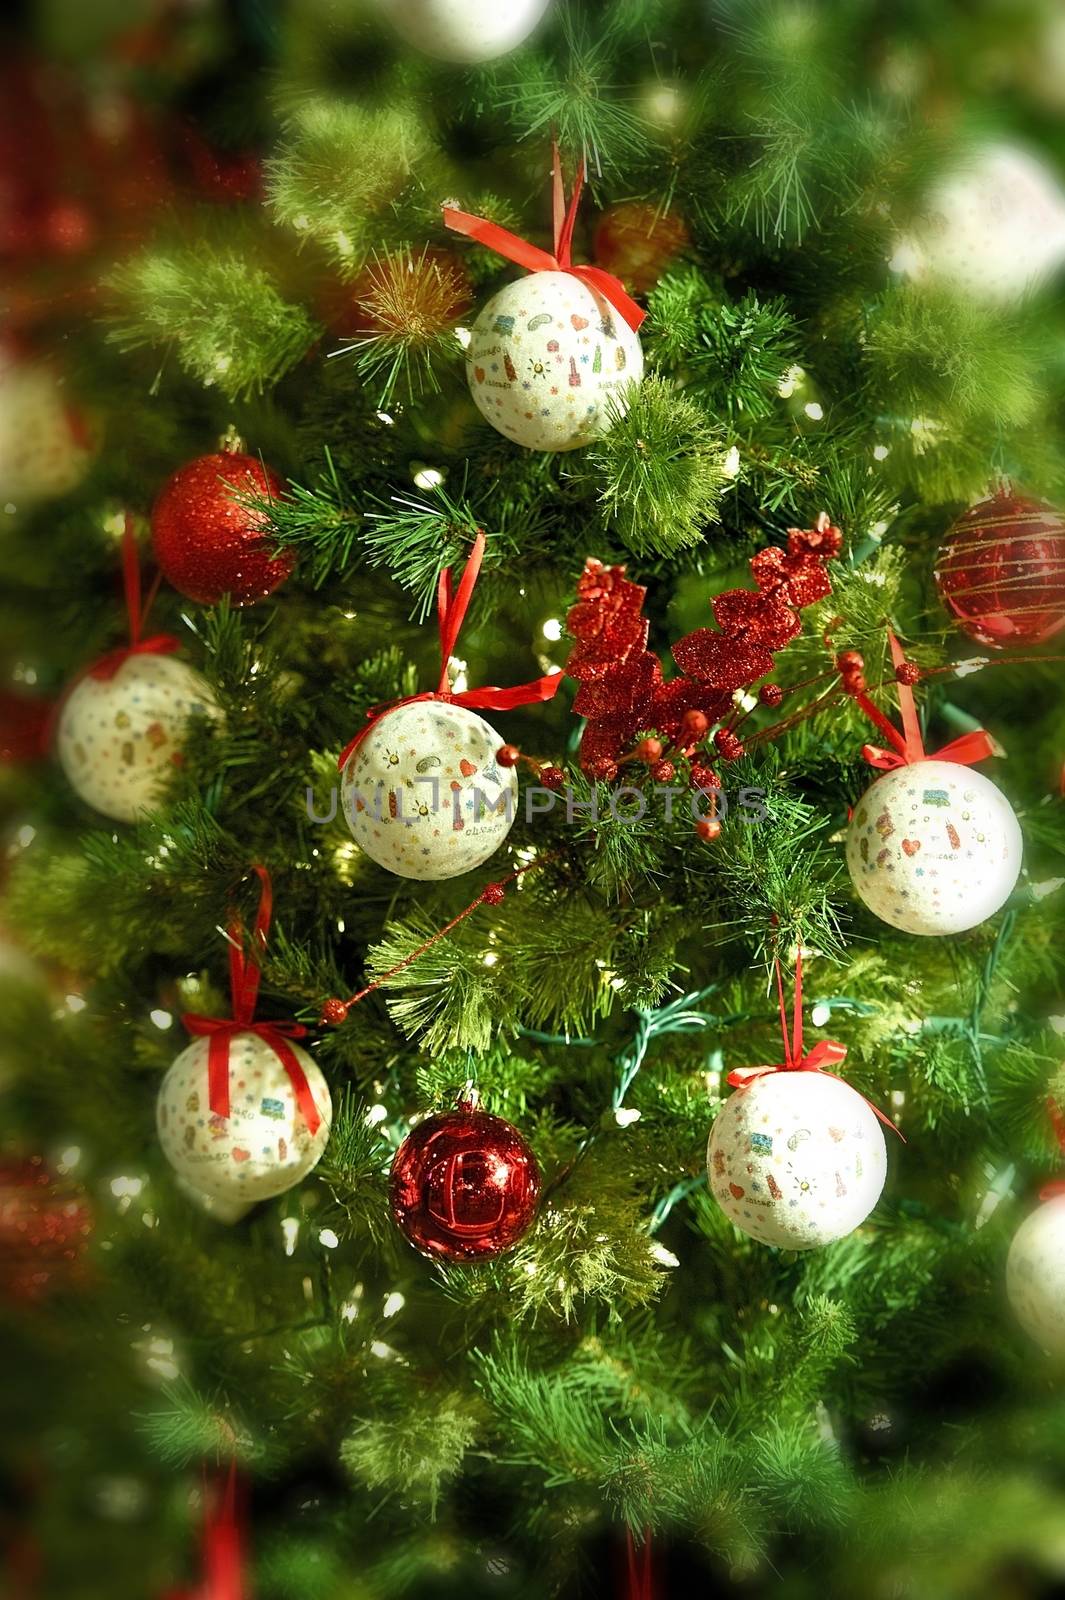 Christmas Background - Christmas Tree Ornaments Vertical Background with Blurred Edges. Seasonal Background